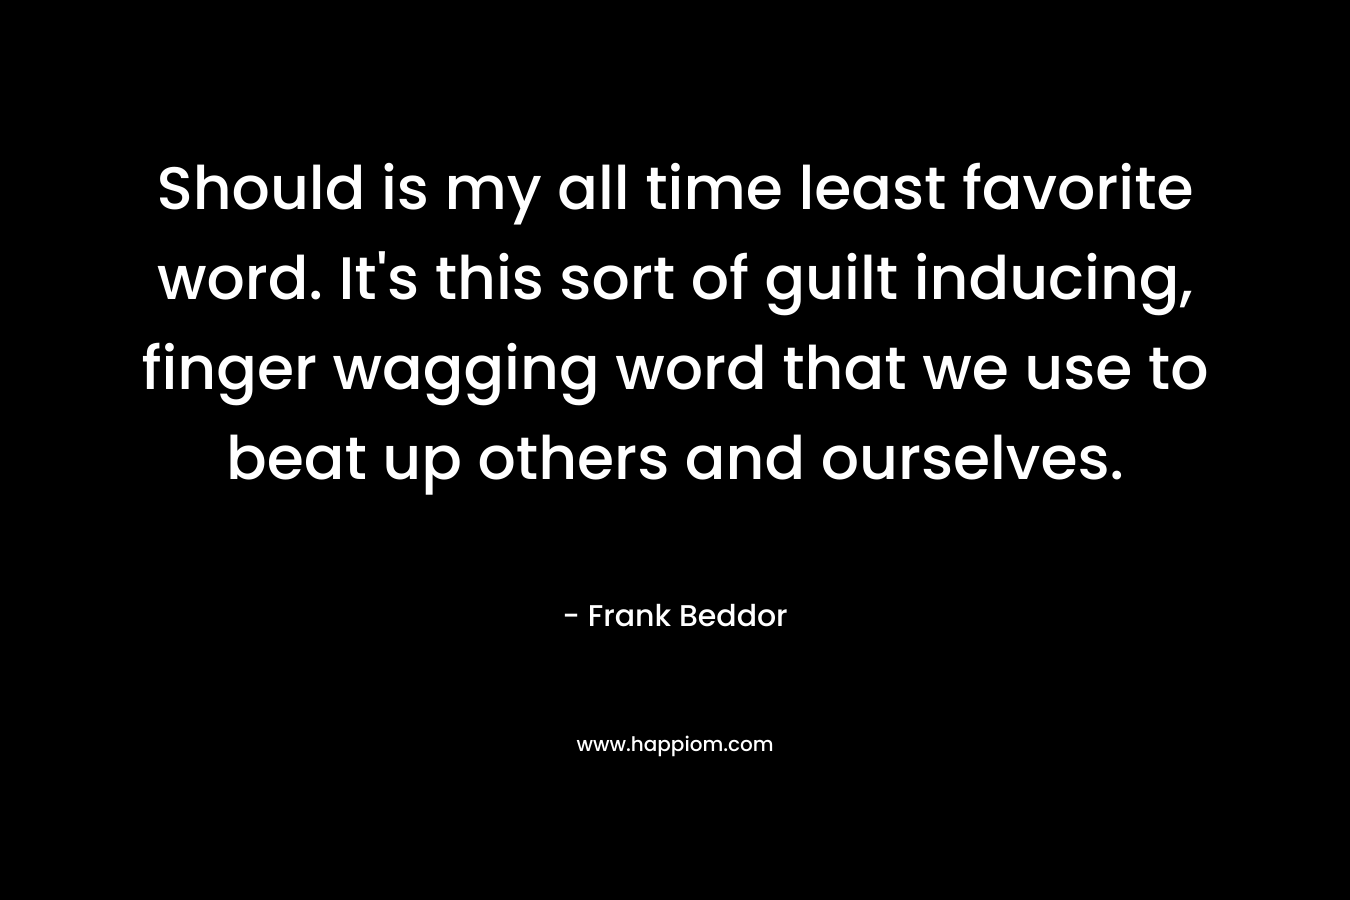 Should is my all time least favorite word. It’s this sort of guilt inducing, finger wagging word that we use to beat up others and ourselves. – Frank Beddor